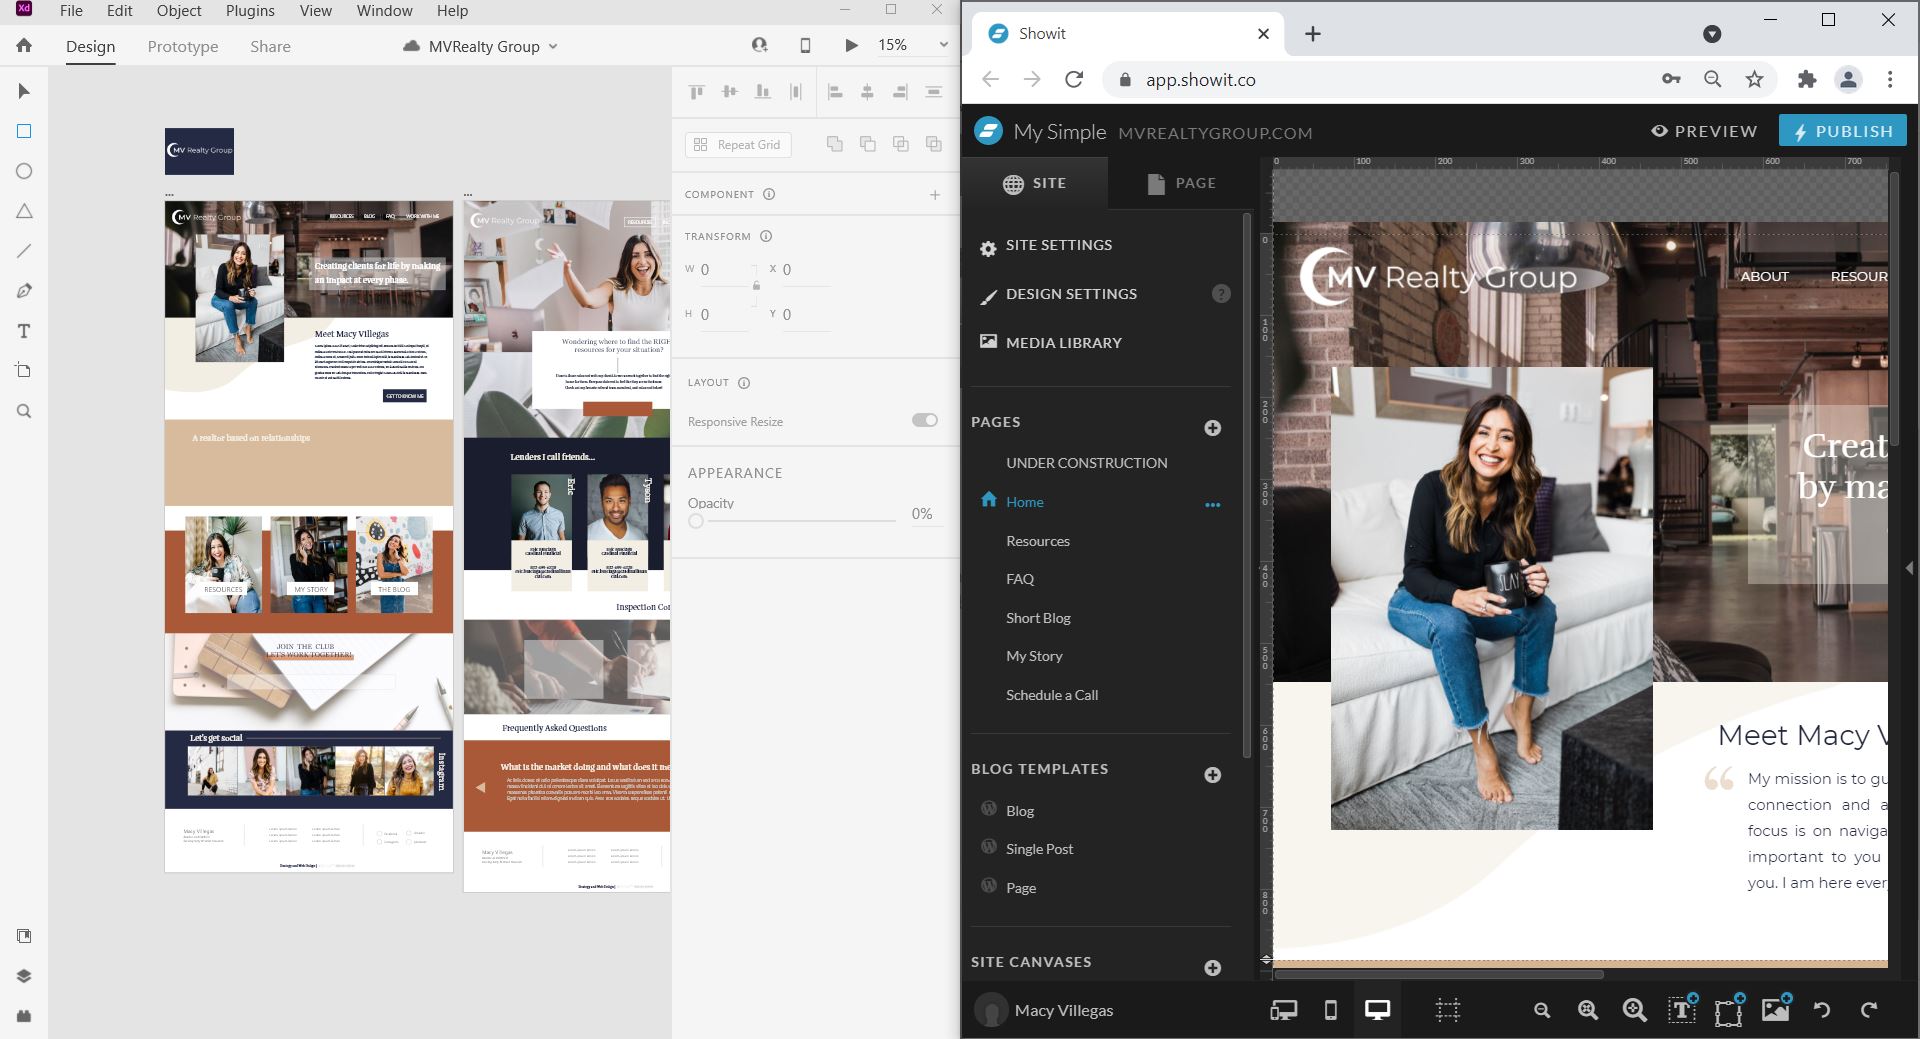 Adobe XD streamlines team collaboration with support for design